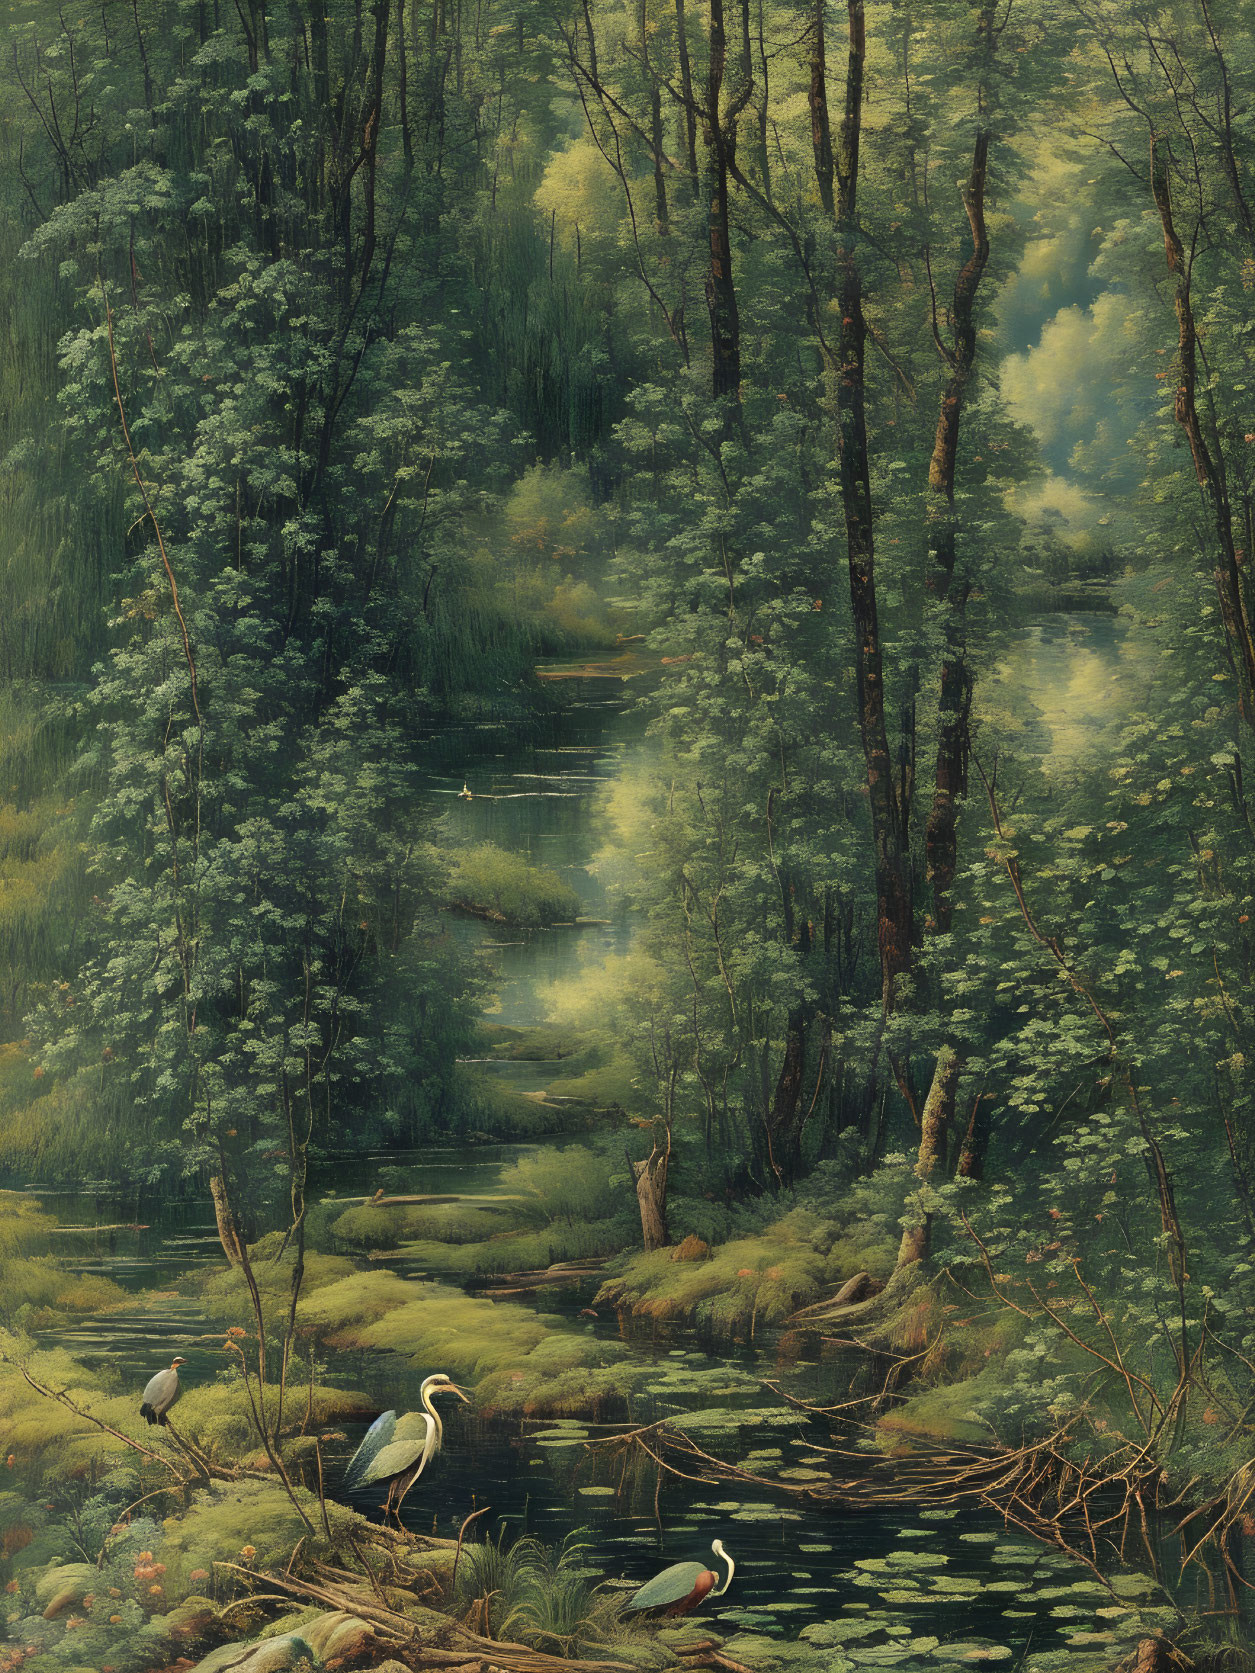 Herons Fishing in a Creek by the Forest